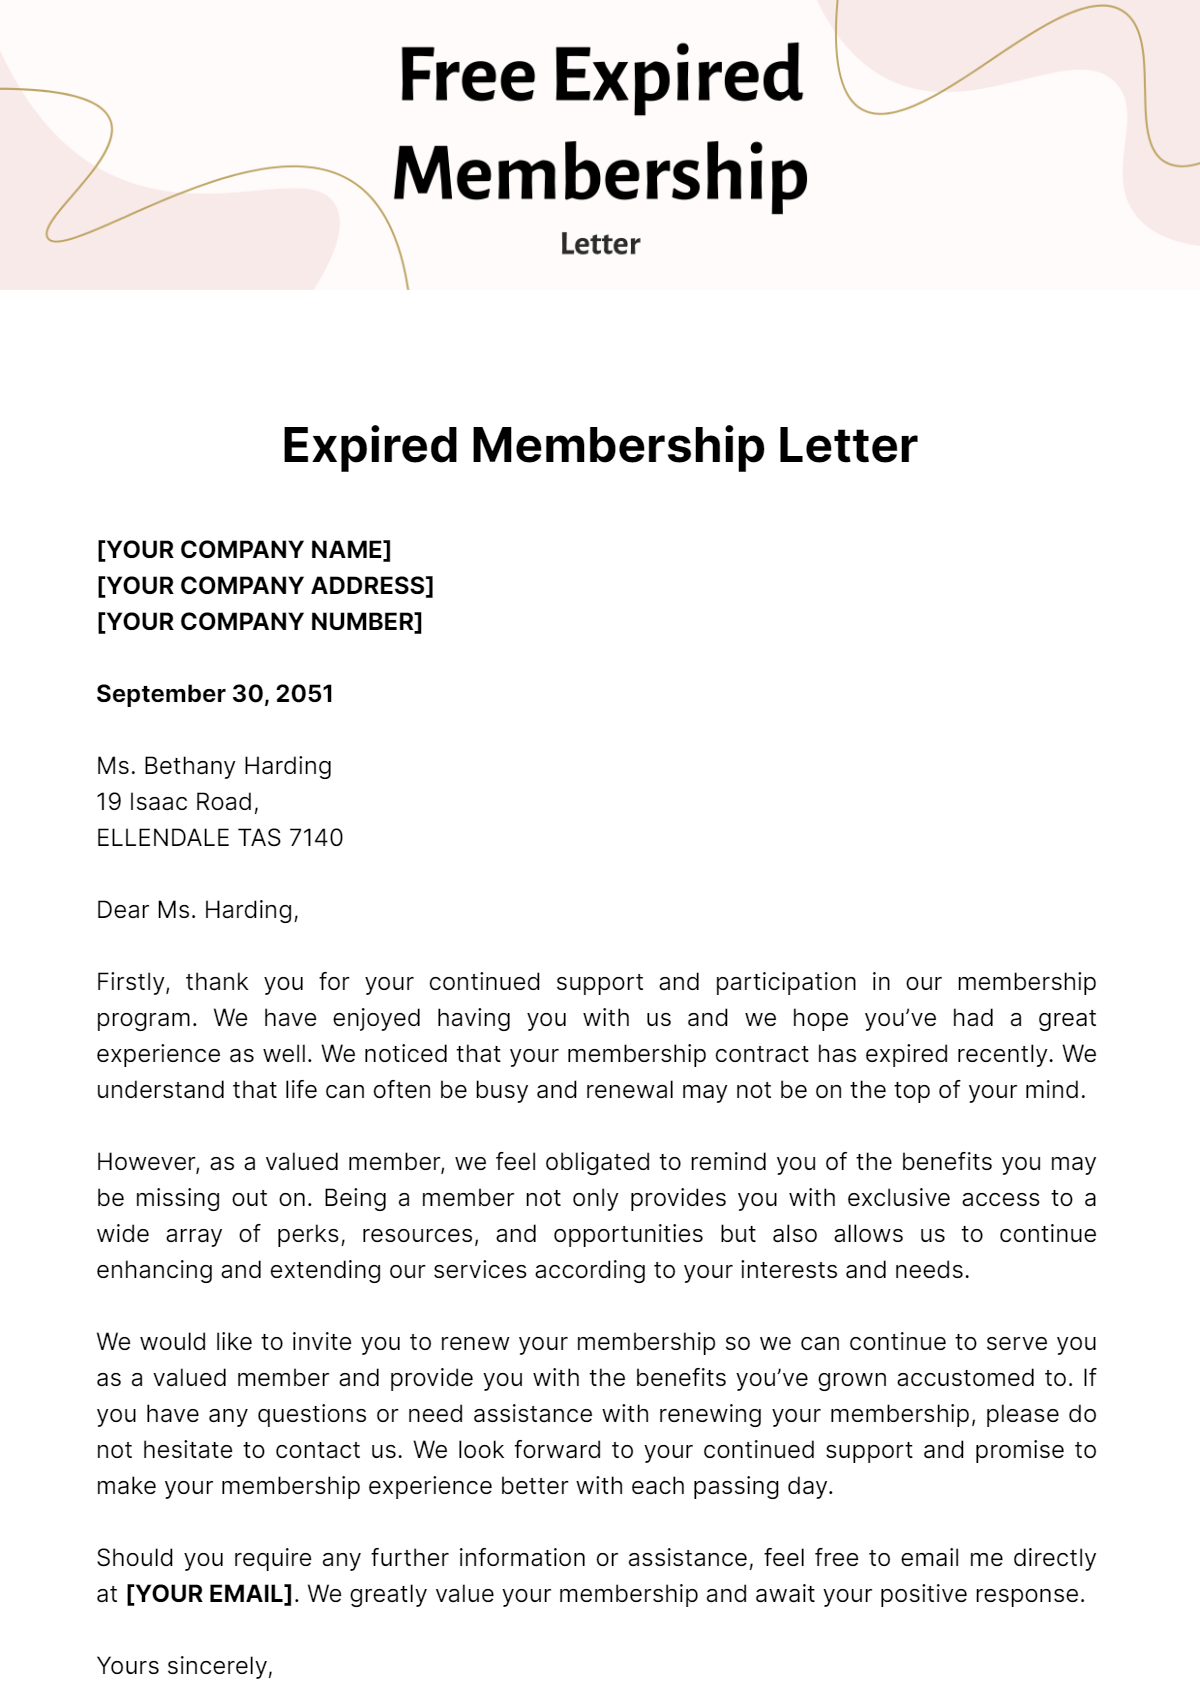 Free Expired Membership Letter Template